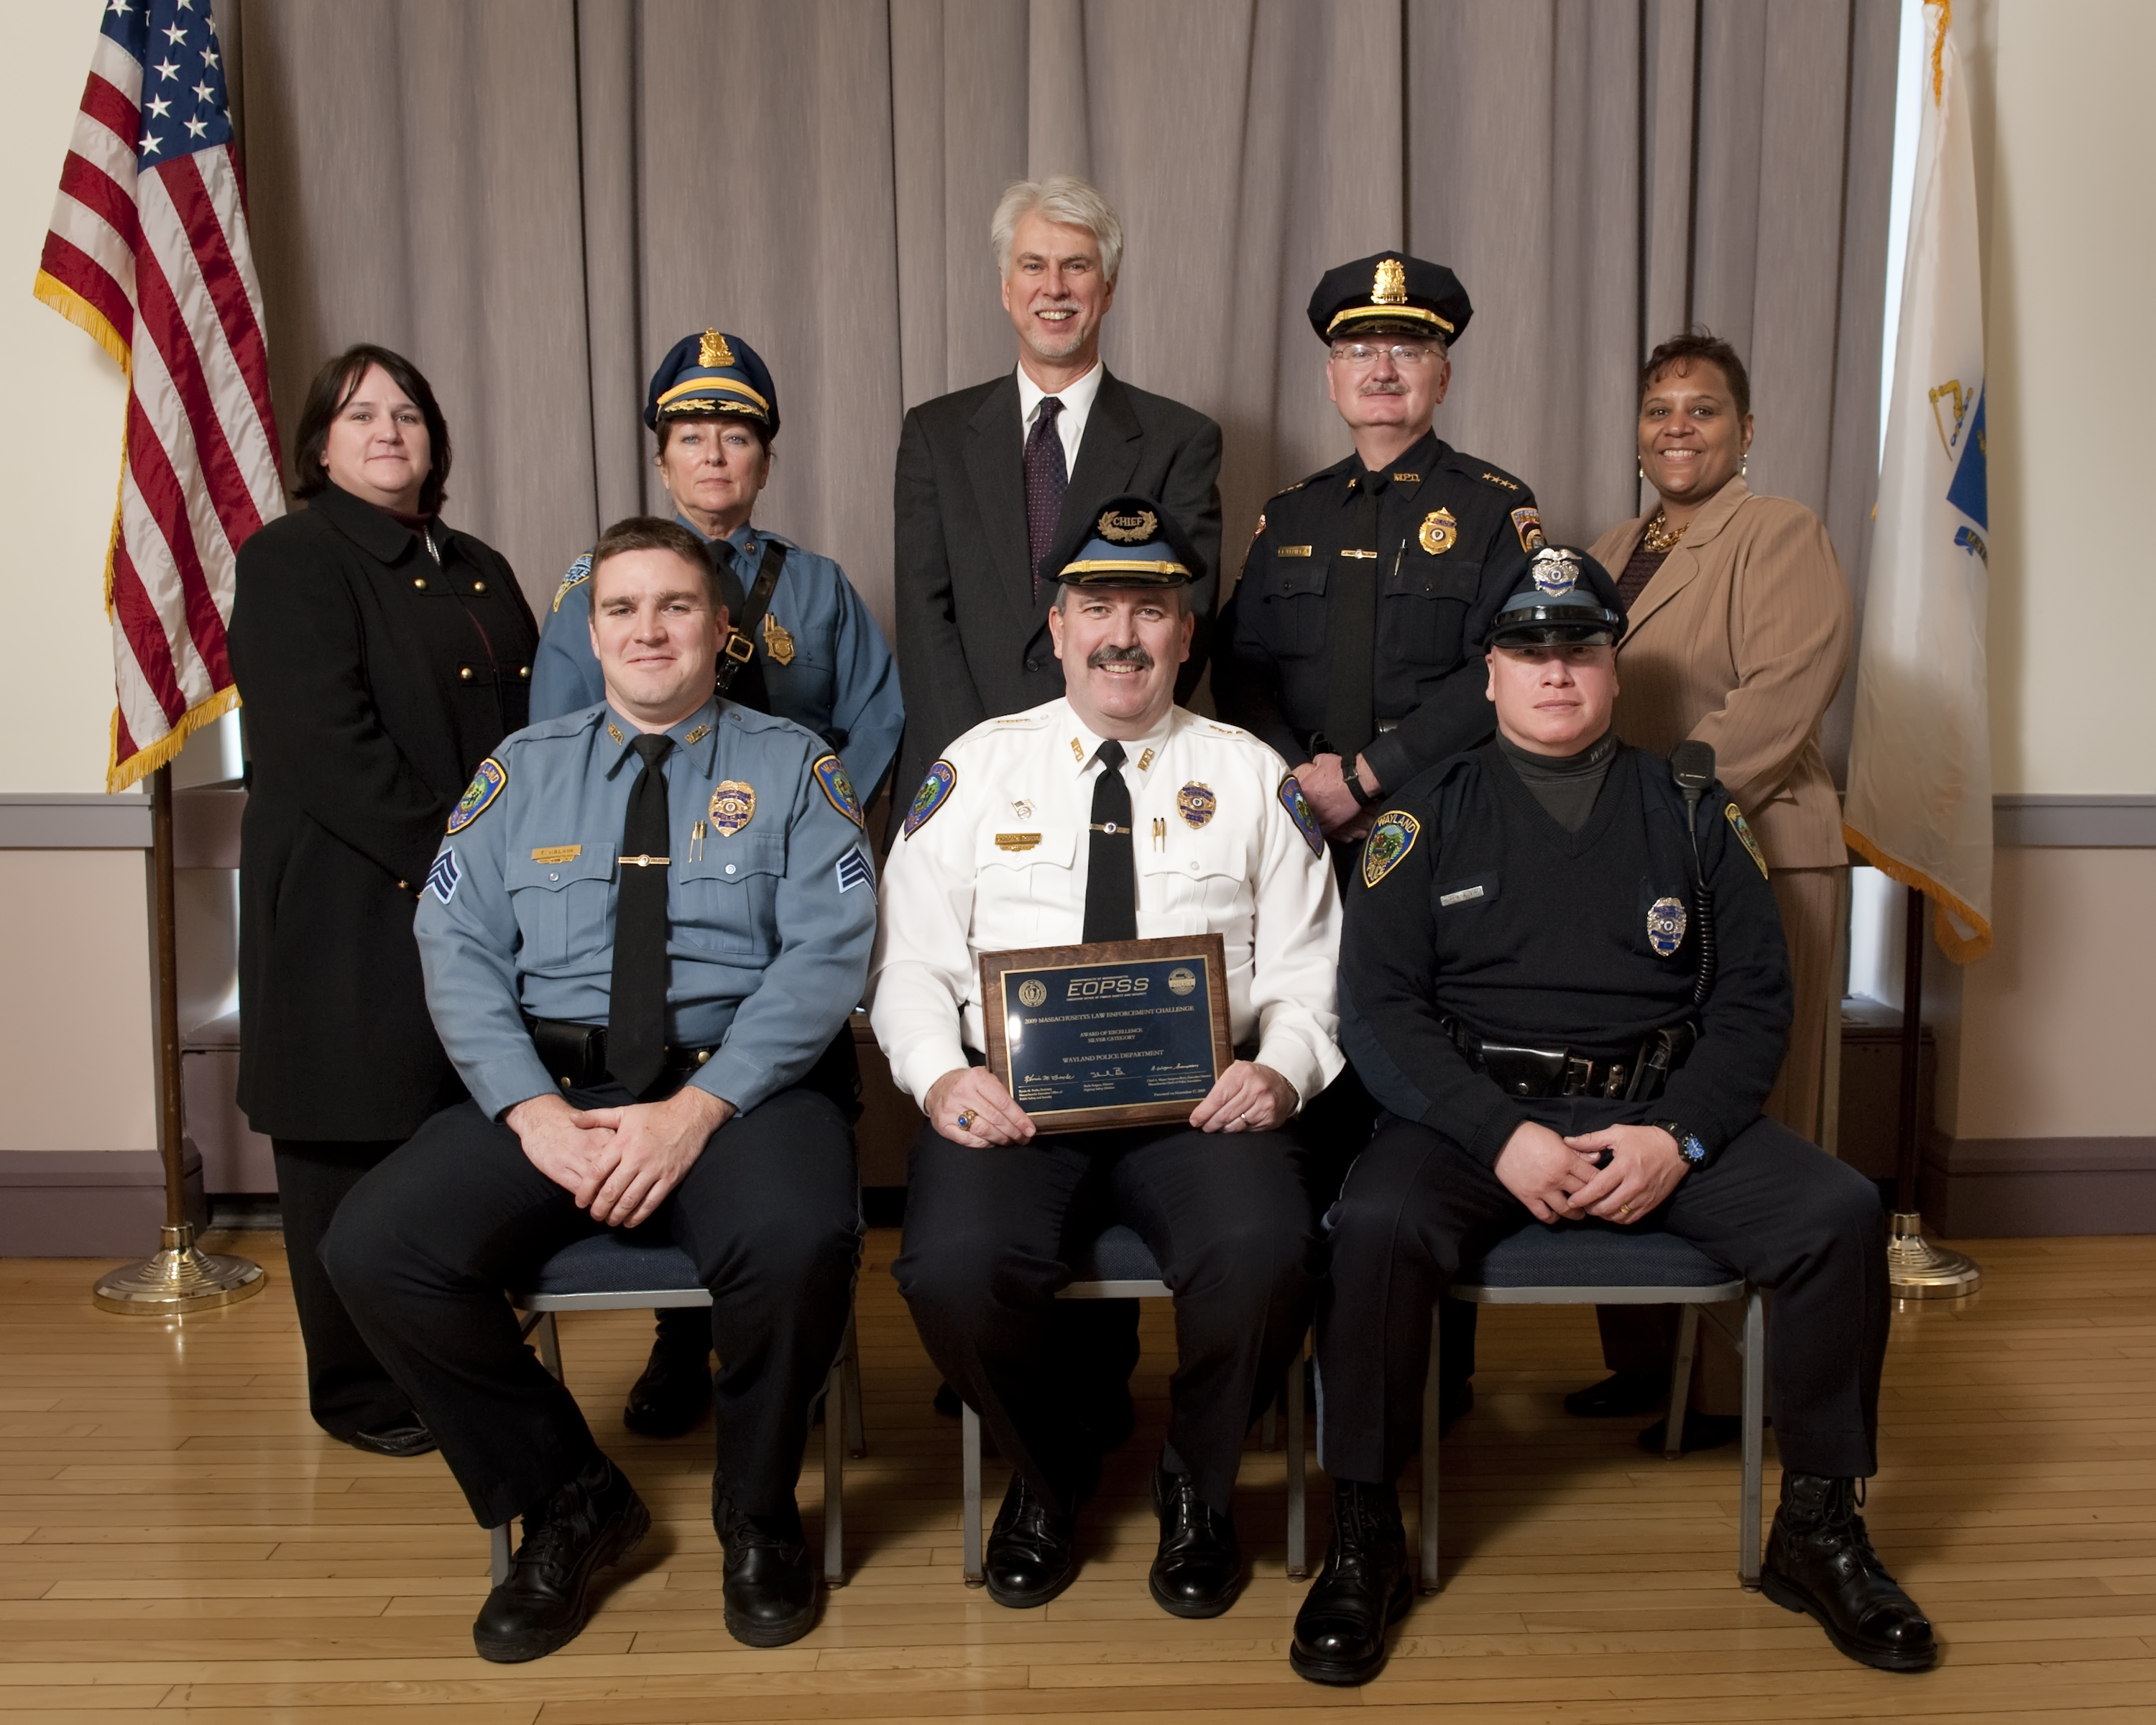 Wayland Police Department was awarded an “Award of Excellence Silver Category” for Municipal Police Departments, in the 2008 Massachusetts Law Enforcement Challenge